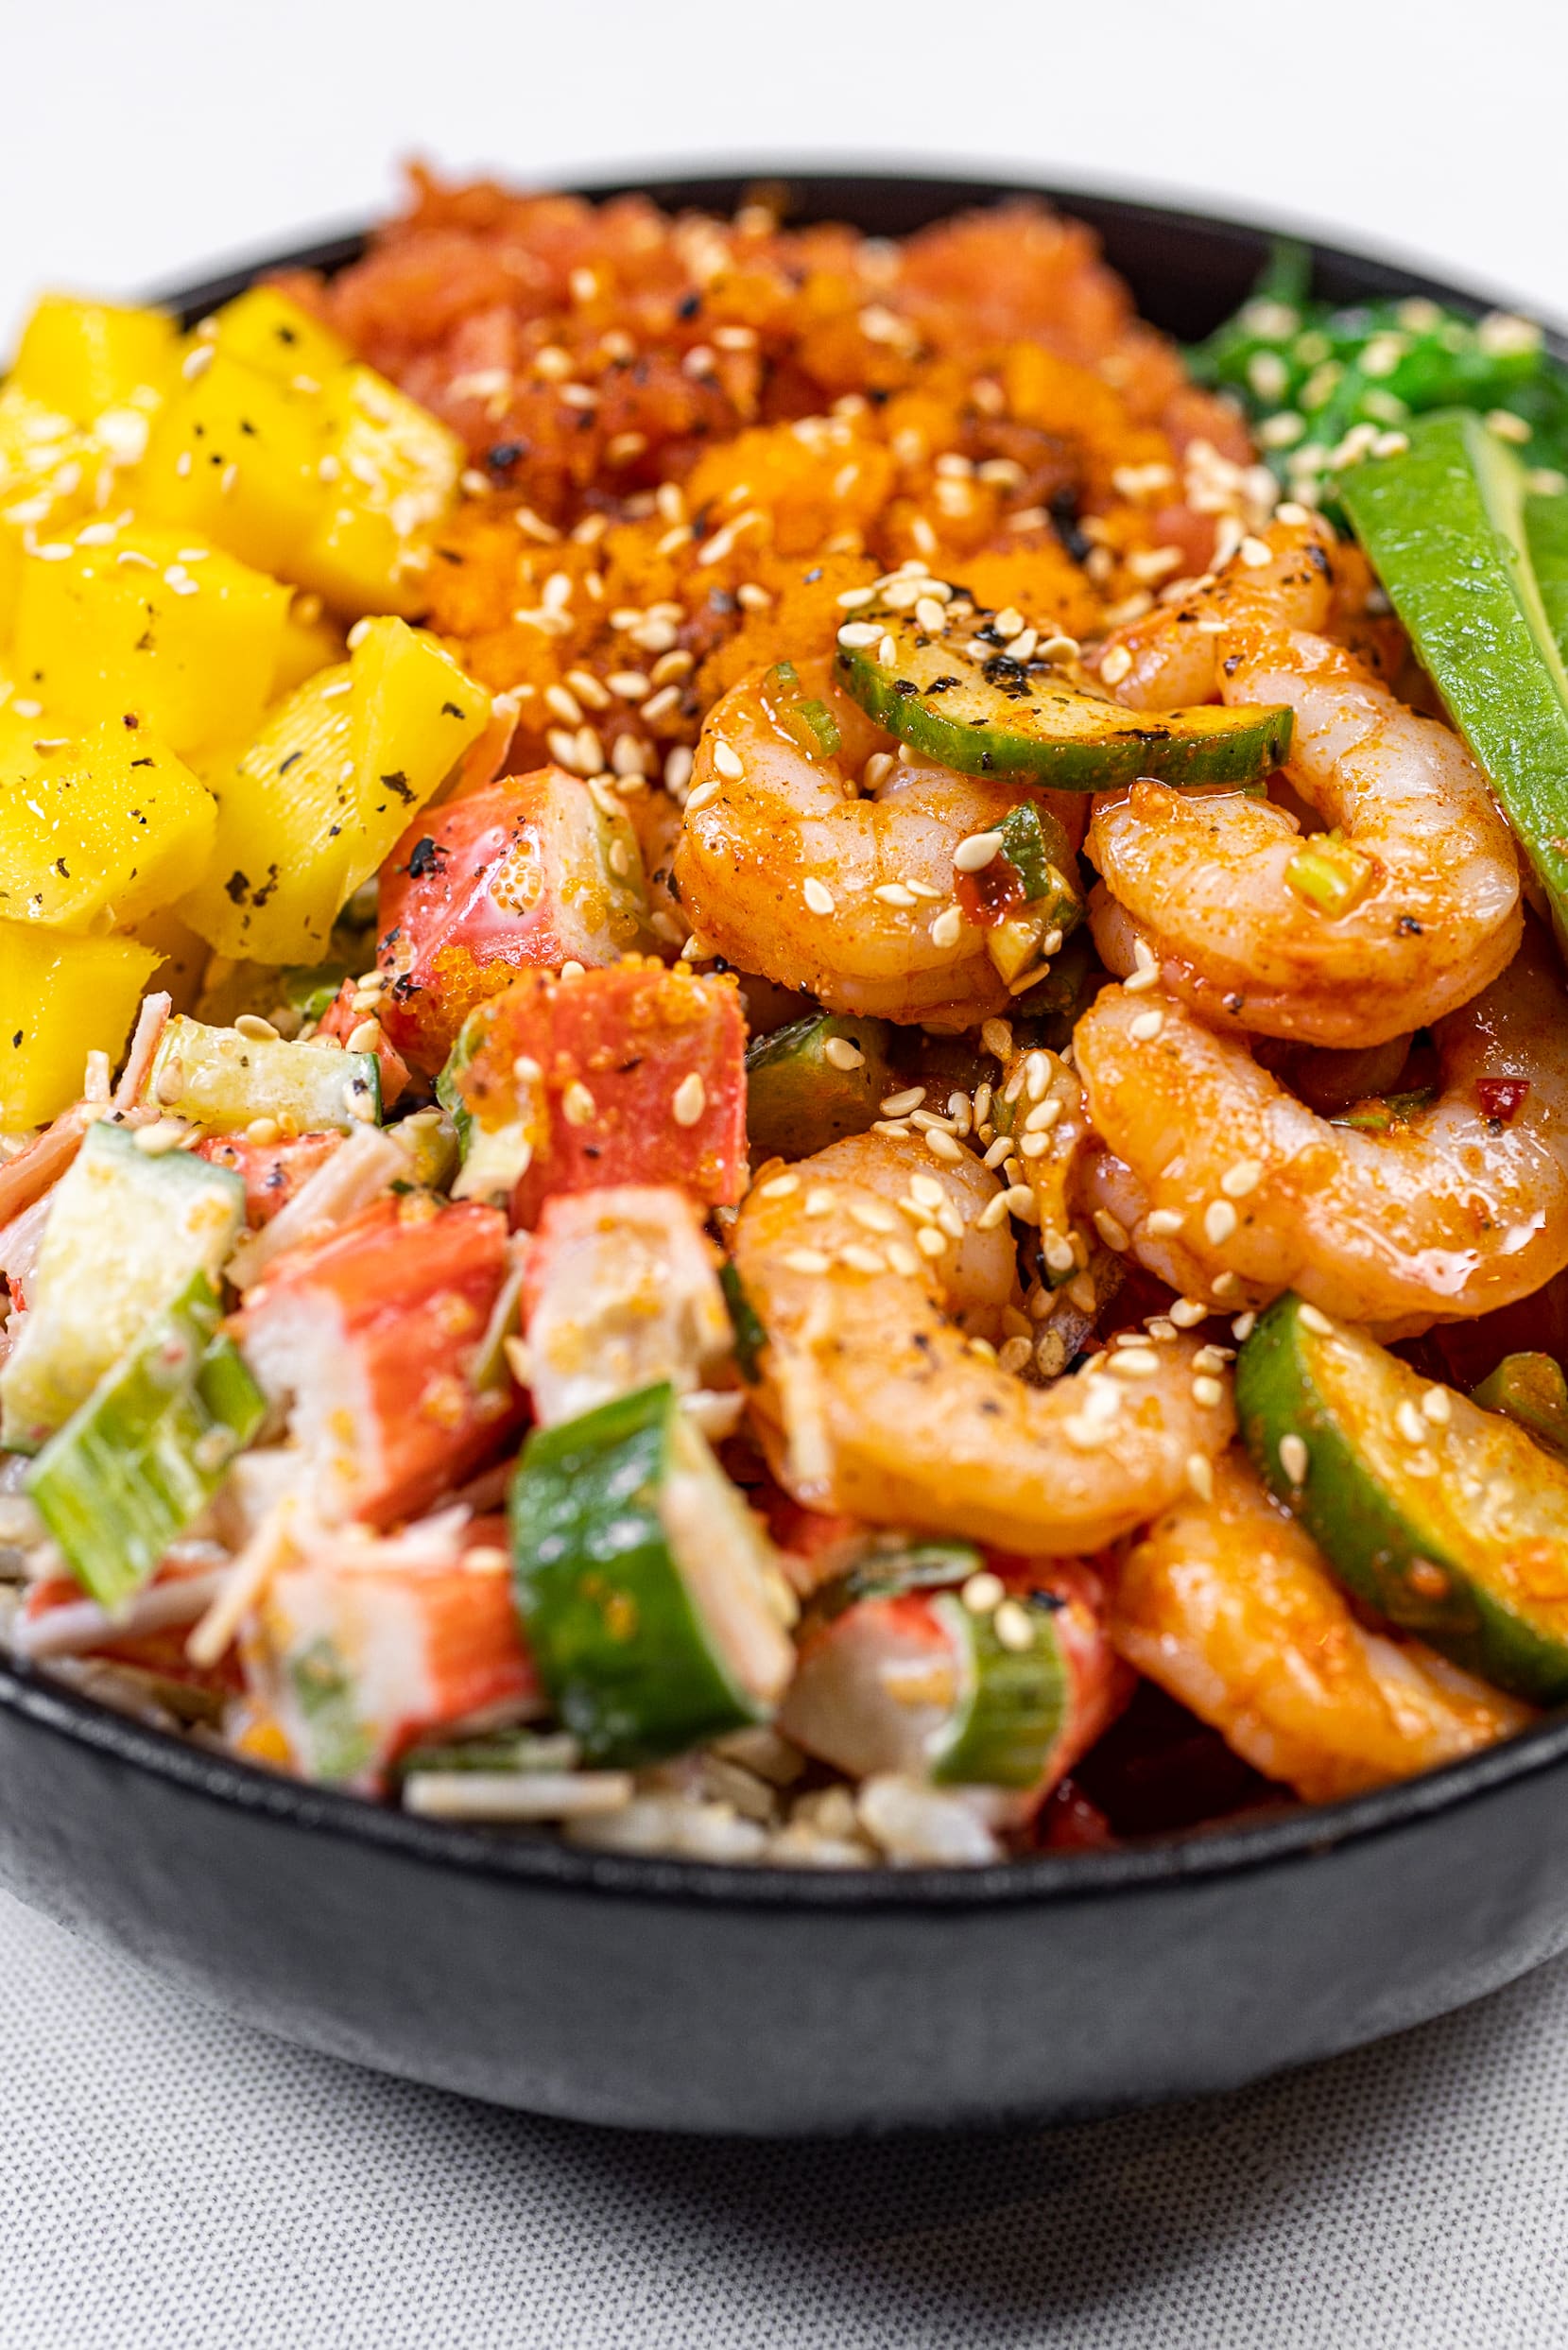 A bowl filled with shrimp and vegetables.